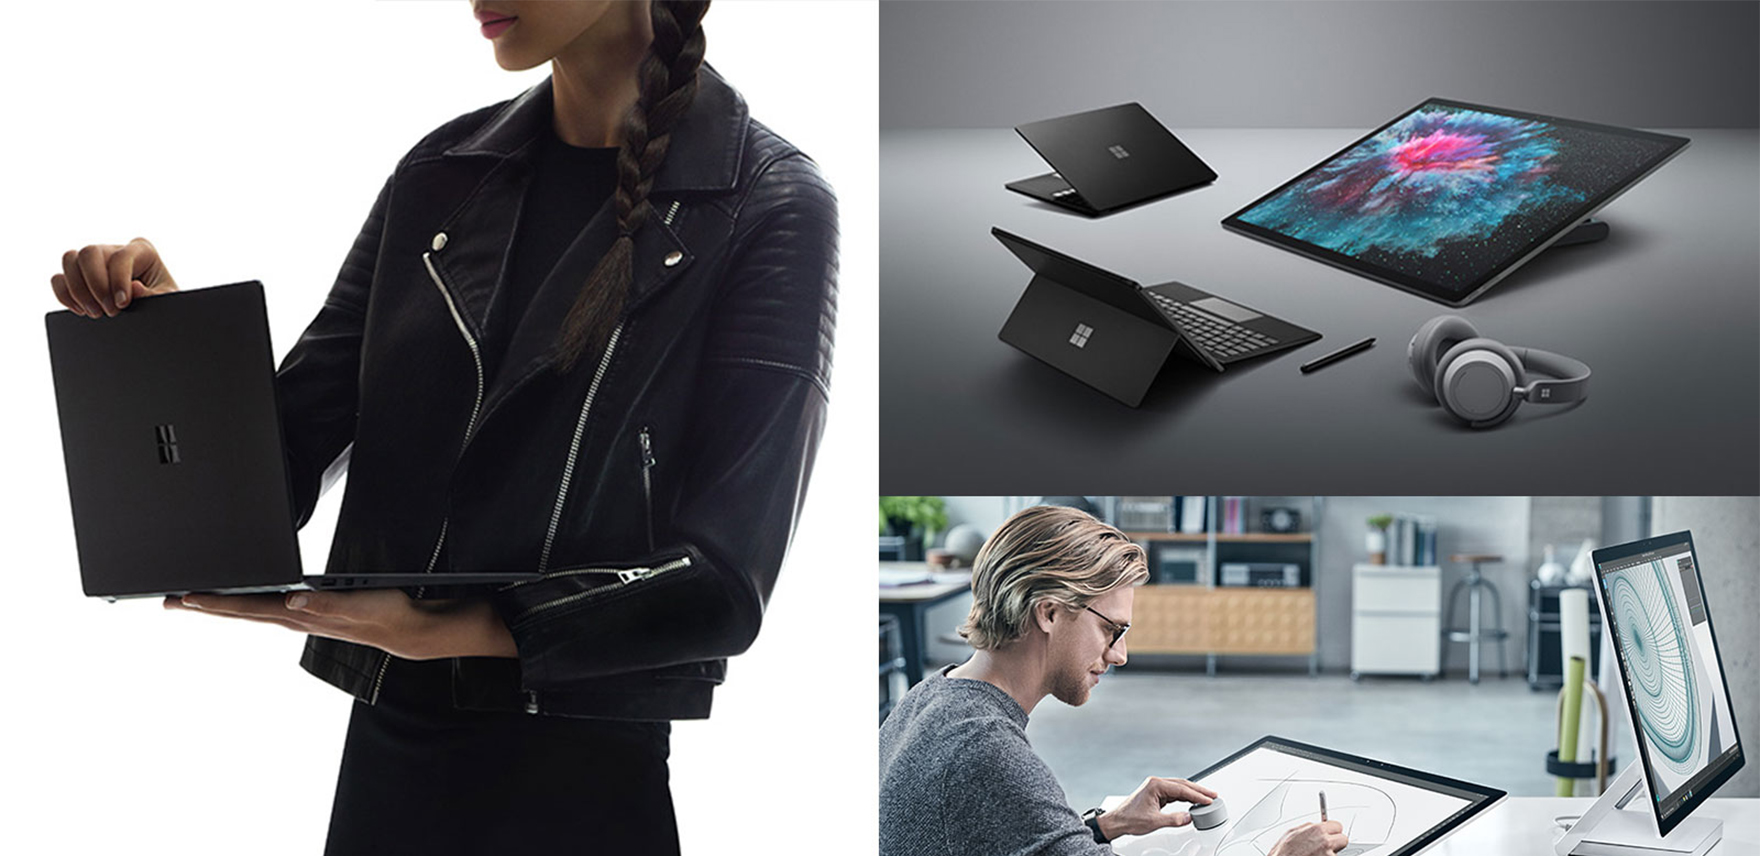 Empowering a new era of personal productivity with new Surface devices | Windows Experience Blog